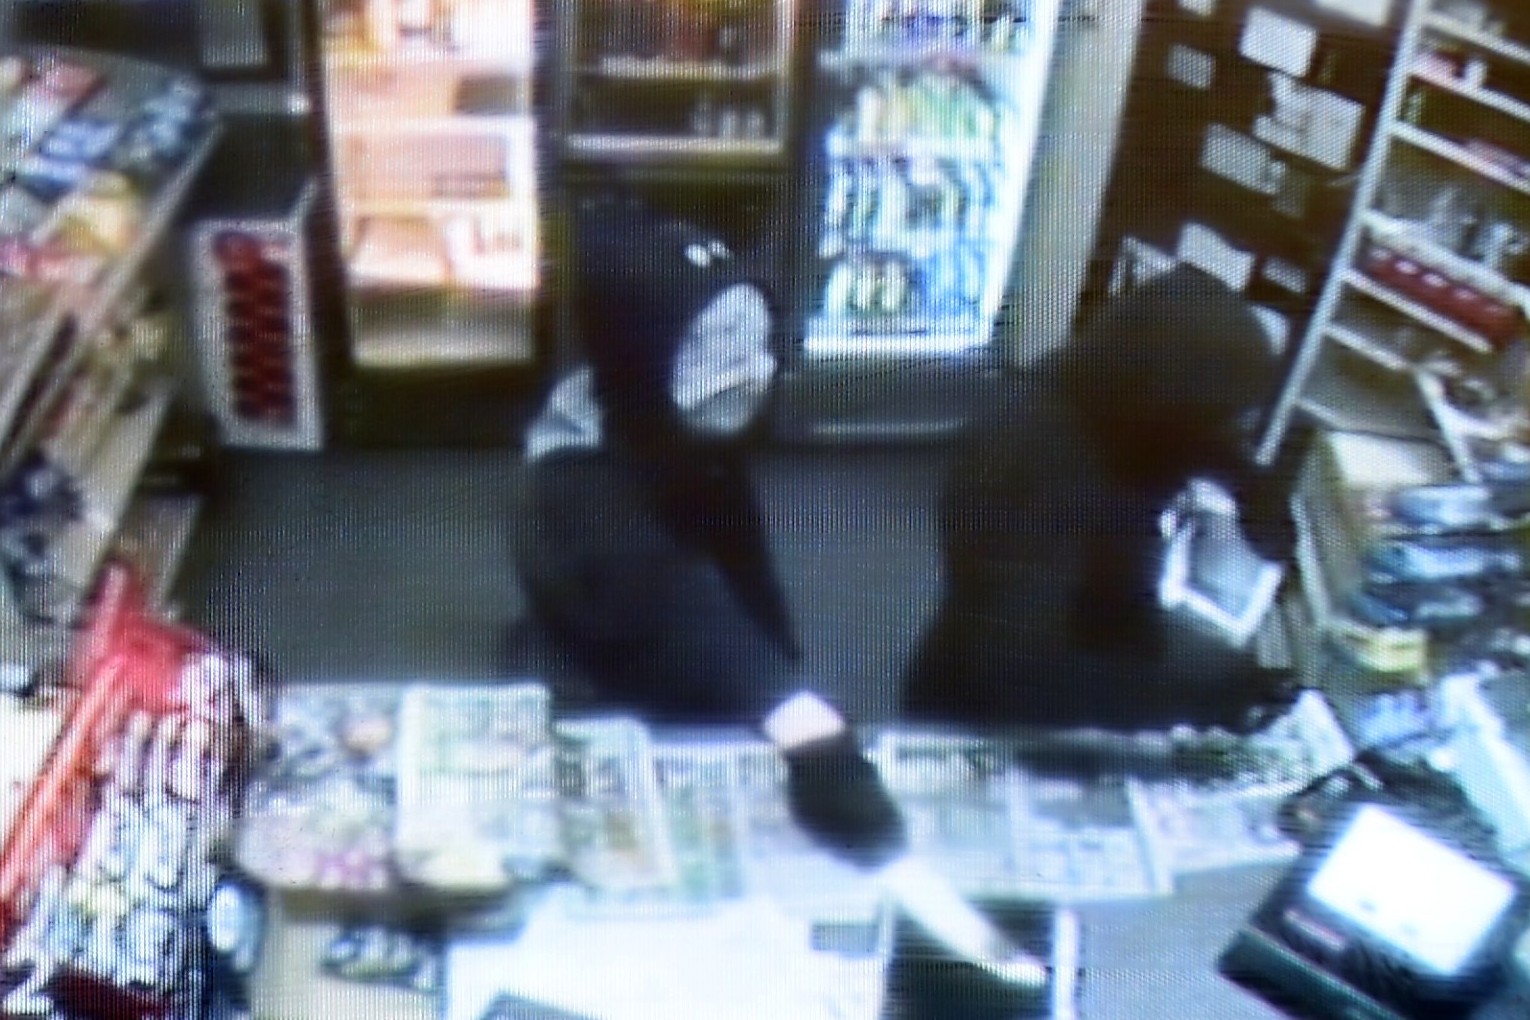 CCTV shows terrifying moment robber with 12-inch knife bursts into Bradford shop